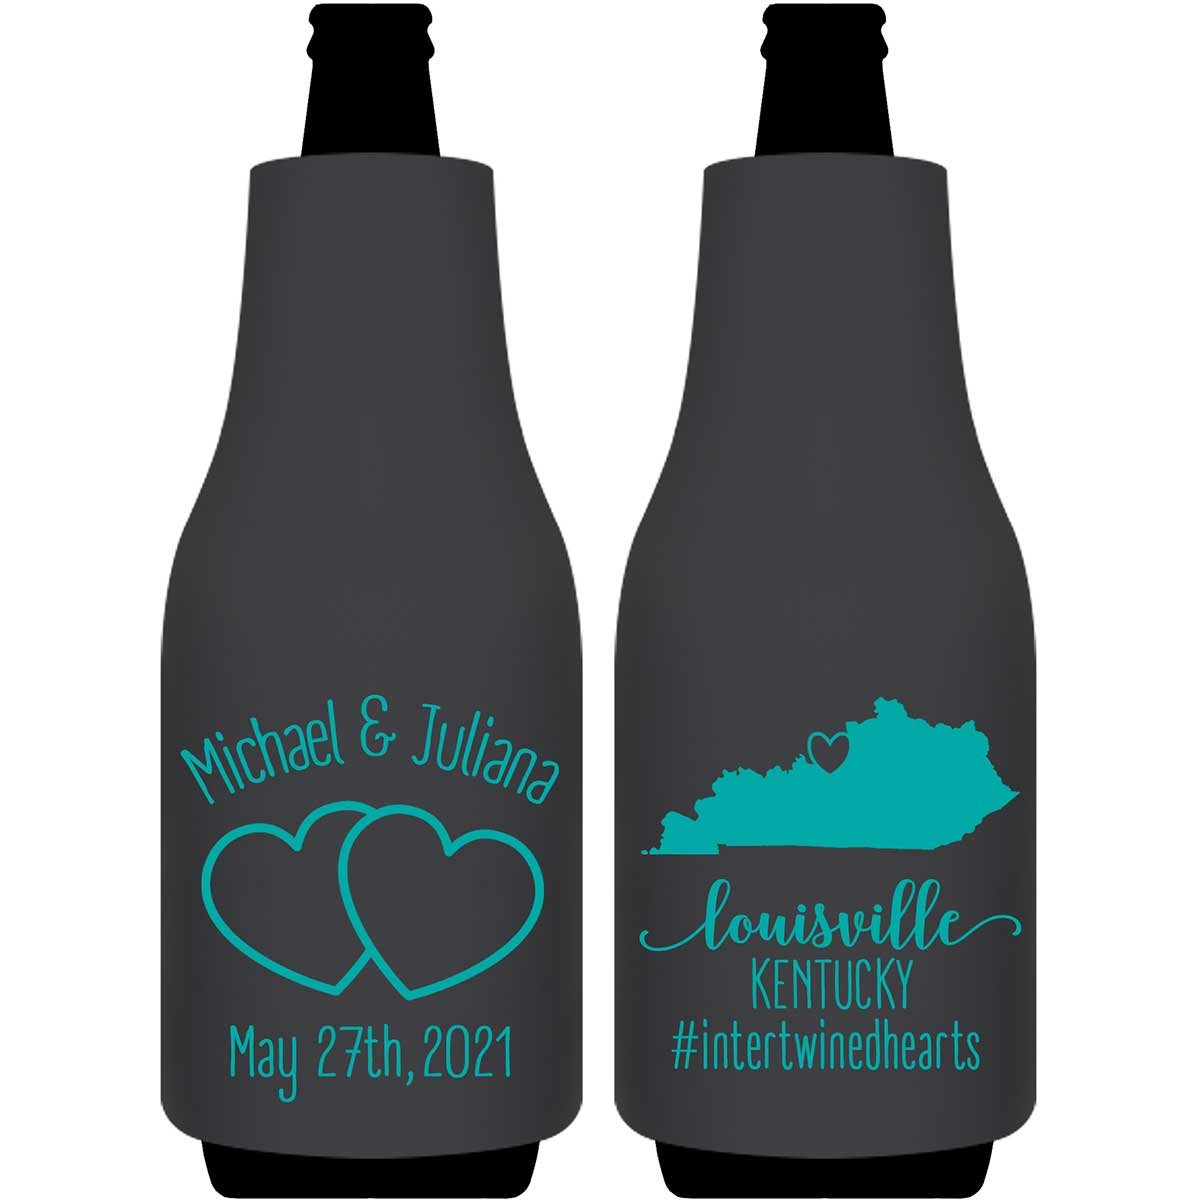 Intertwined Hearts 2A With Map Foldable Bottle Sleeve Koozies Wedding Gifts for Guests